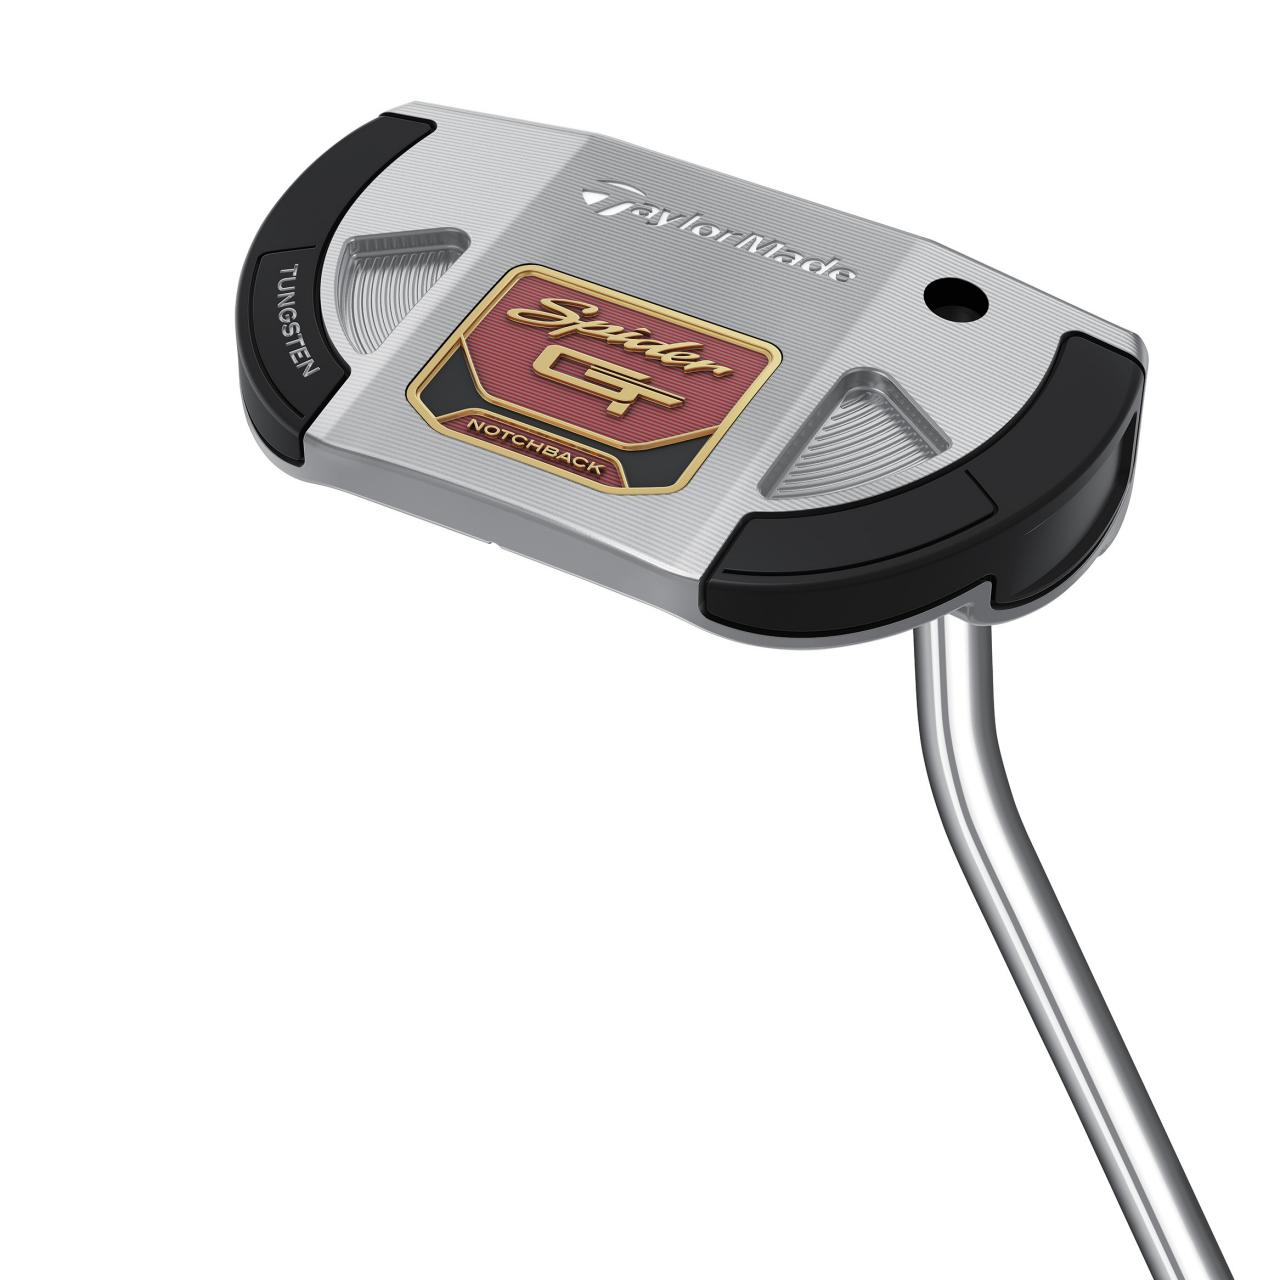 TaylorMade Spider GT putters: What you need to know | Golf